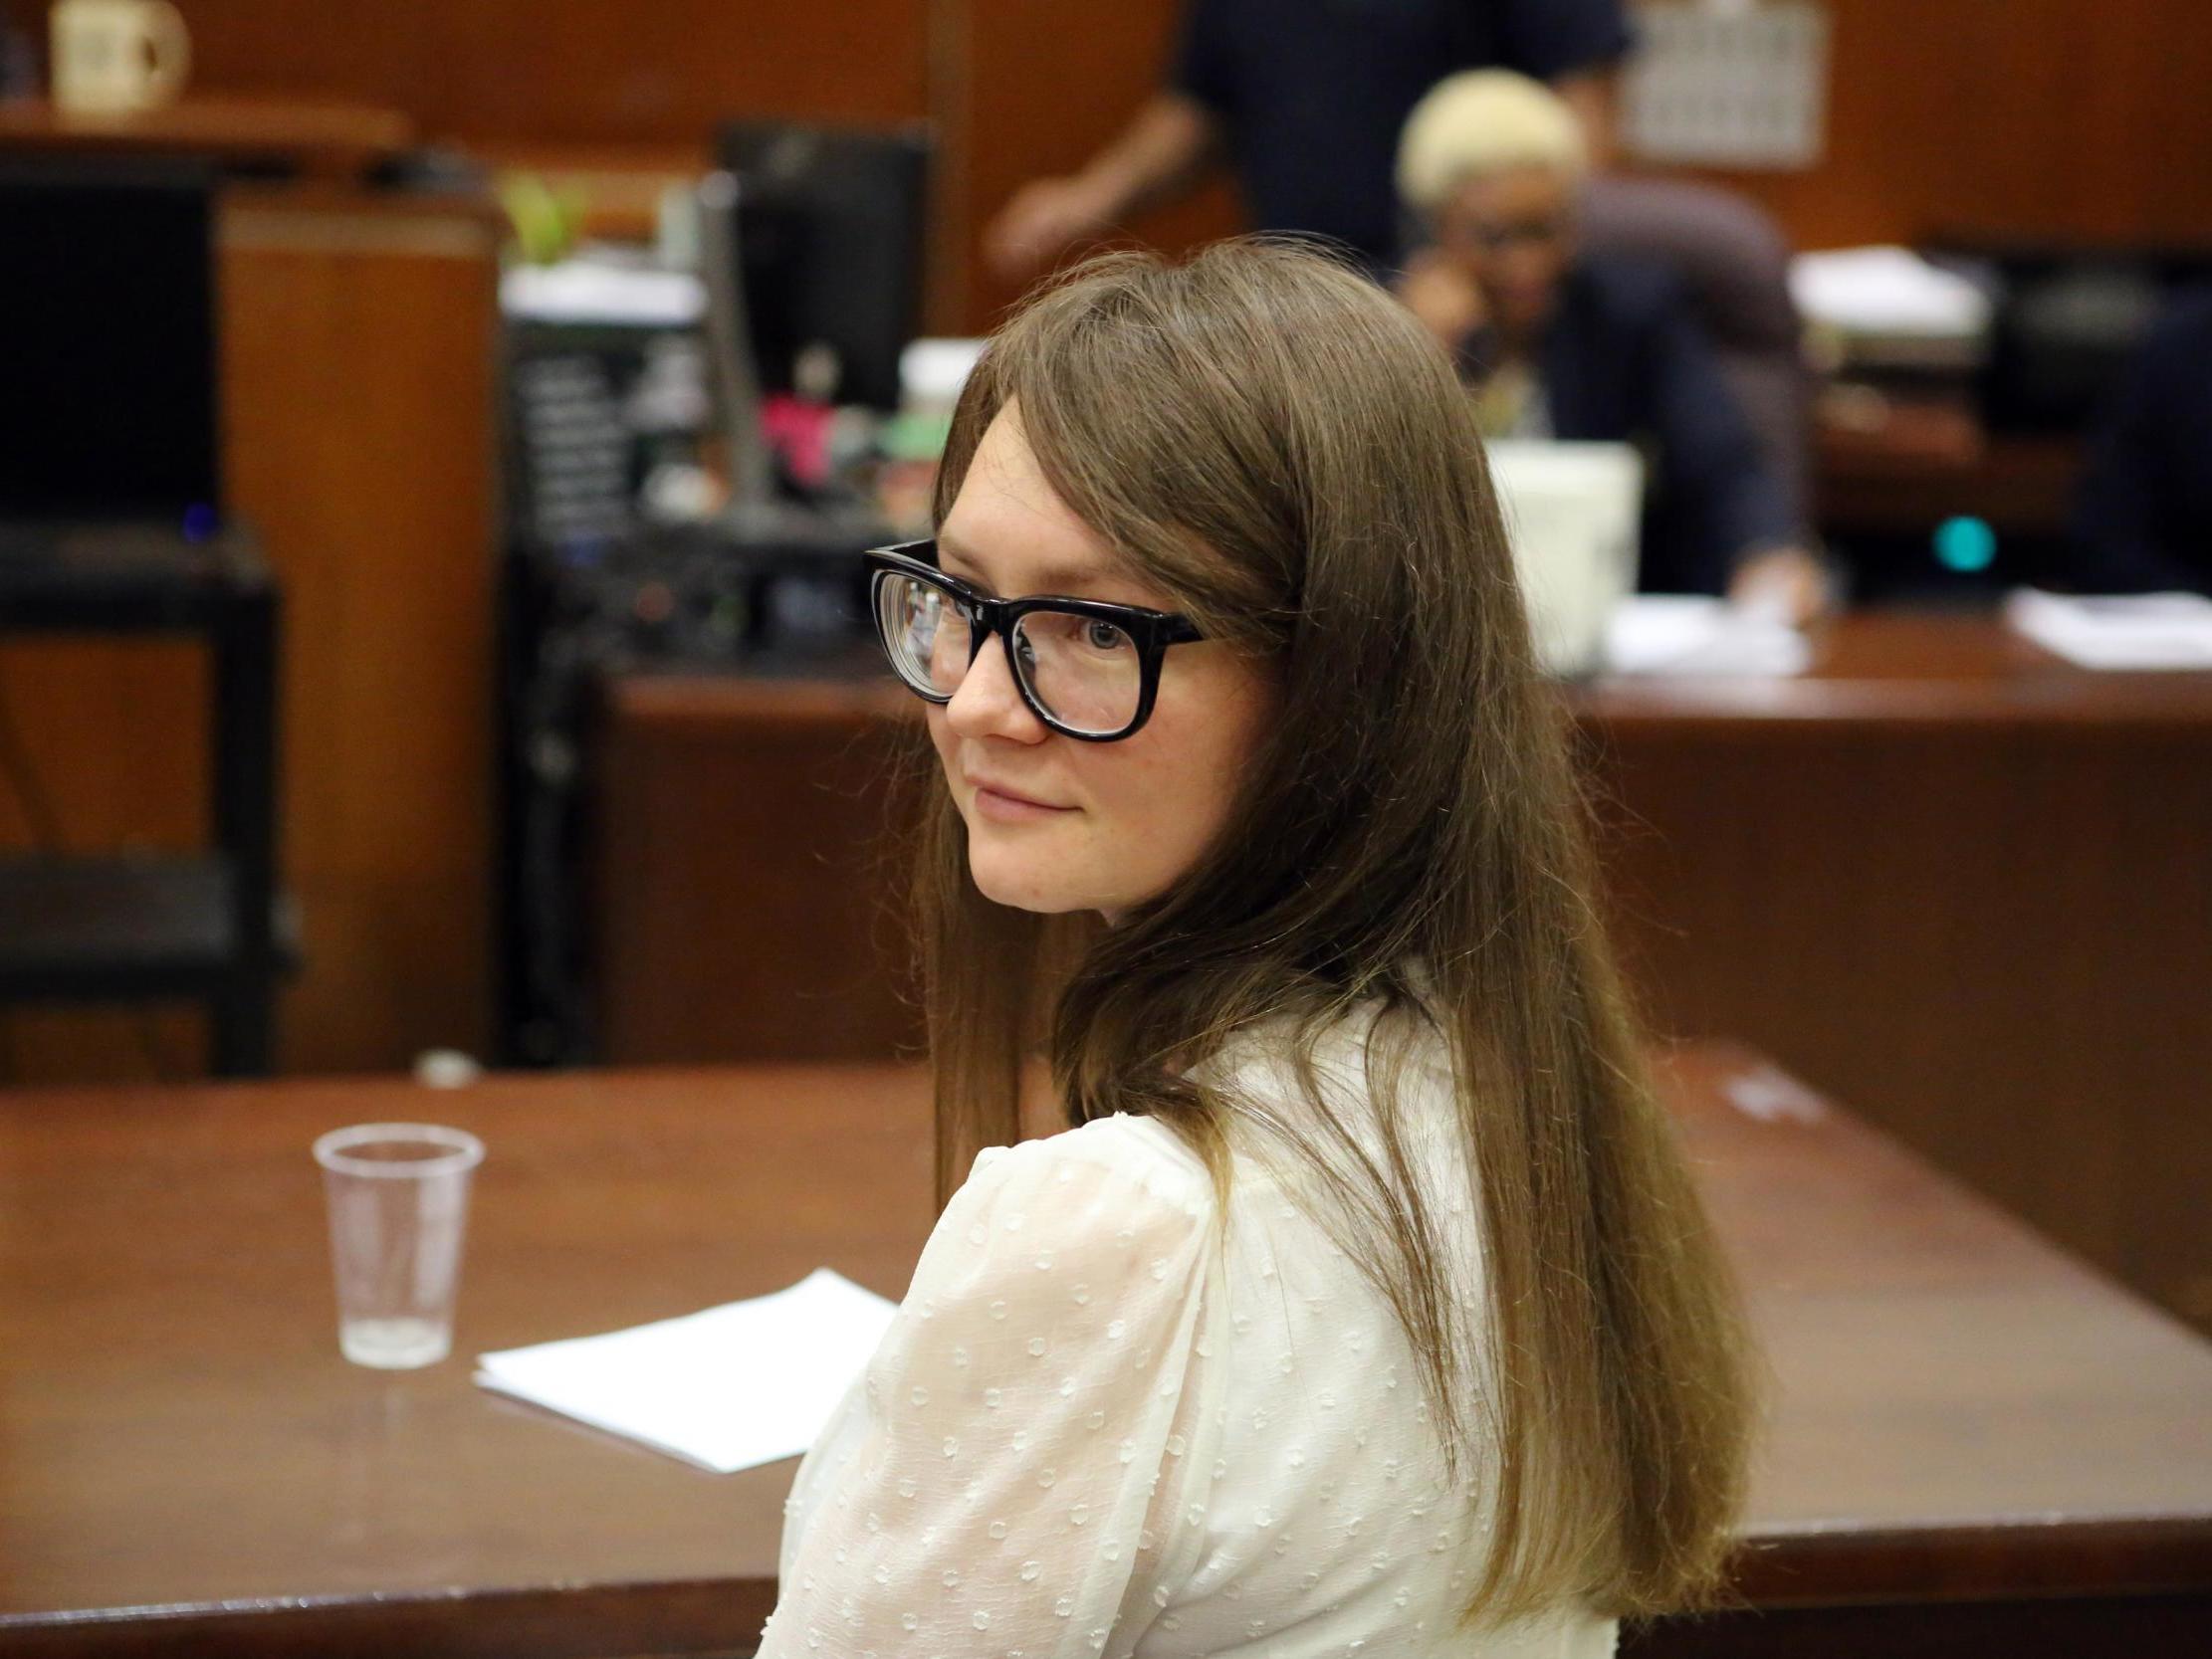 Anna Sorokin appears for her trial in Manhattan Supreme Court, 24 April 2019